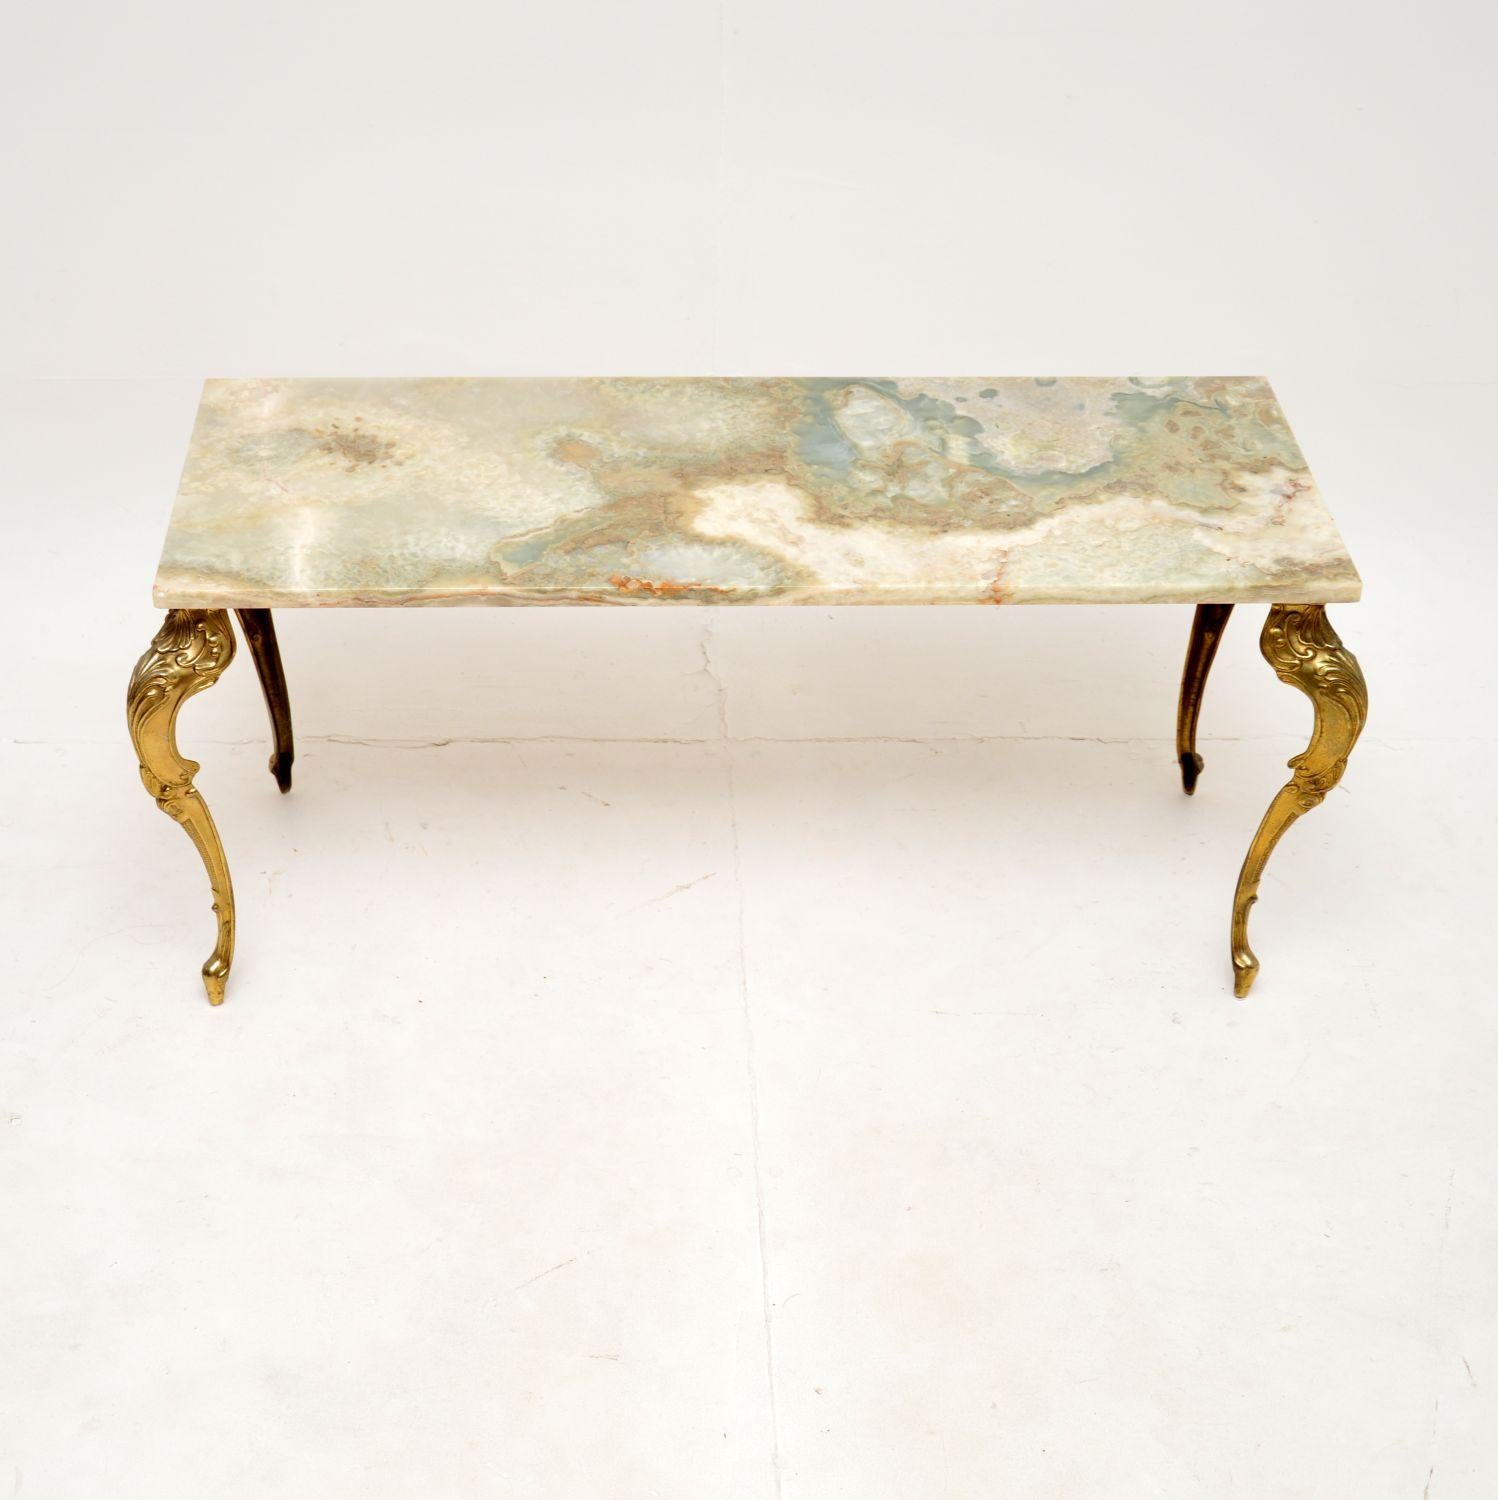 A beautiful and elegant antique French onyx and brass coffee table, dating from the 1930’s.

It is of excellent quality and is a very useful size. The onyx top is absolutely stunning, with incredible colours and grain patterns. It sits loose on the